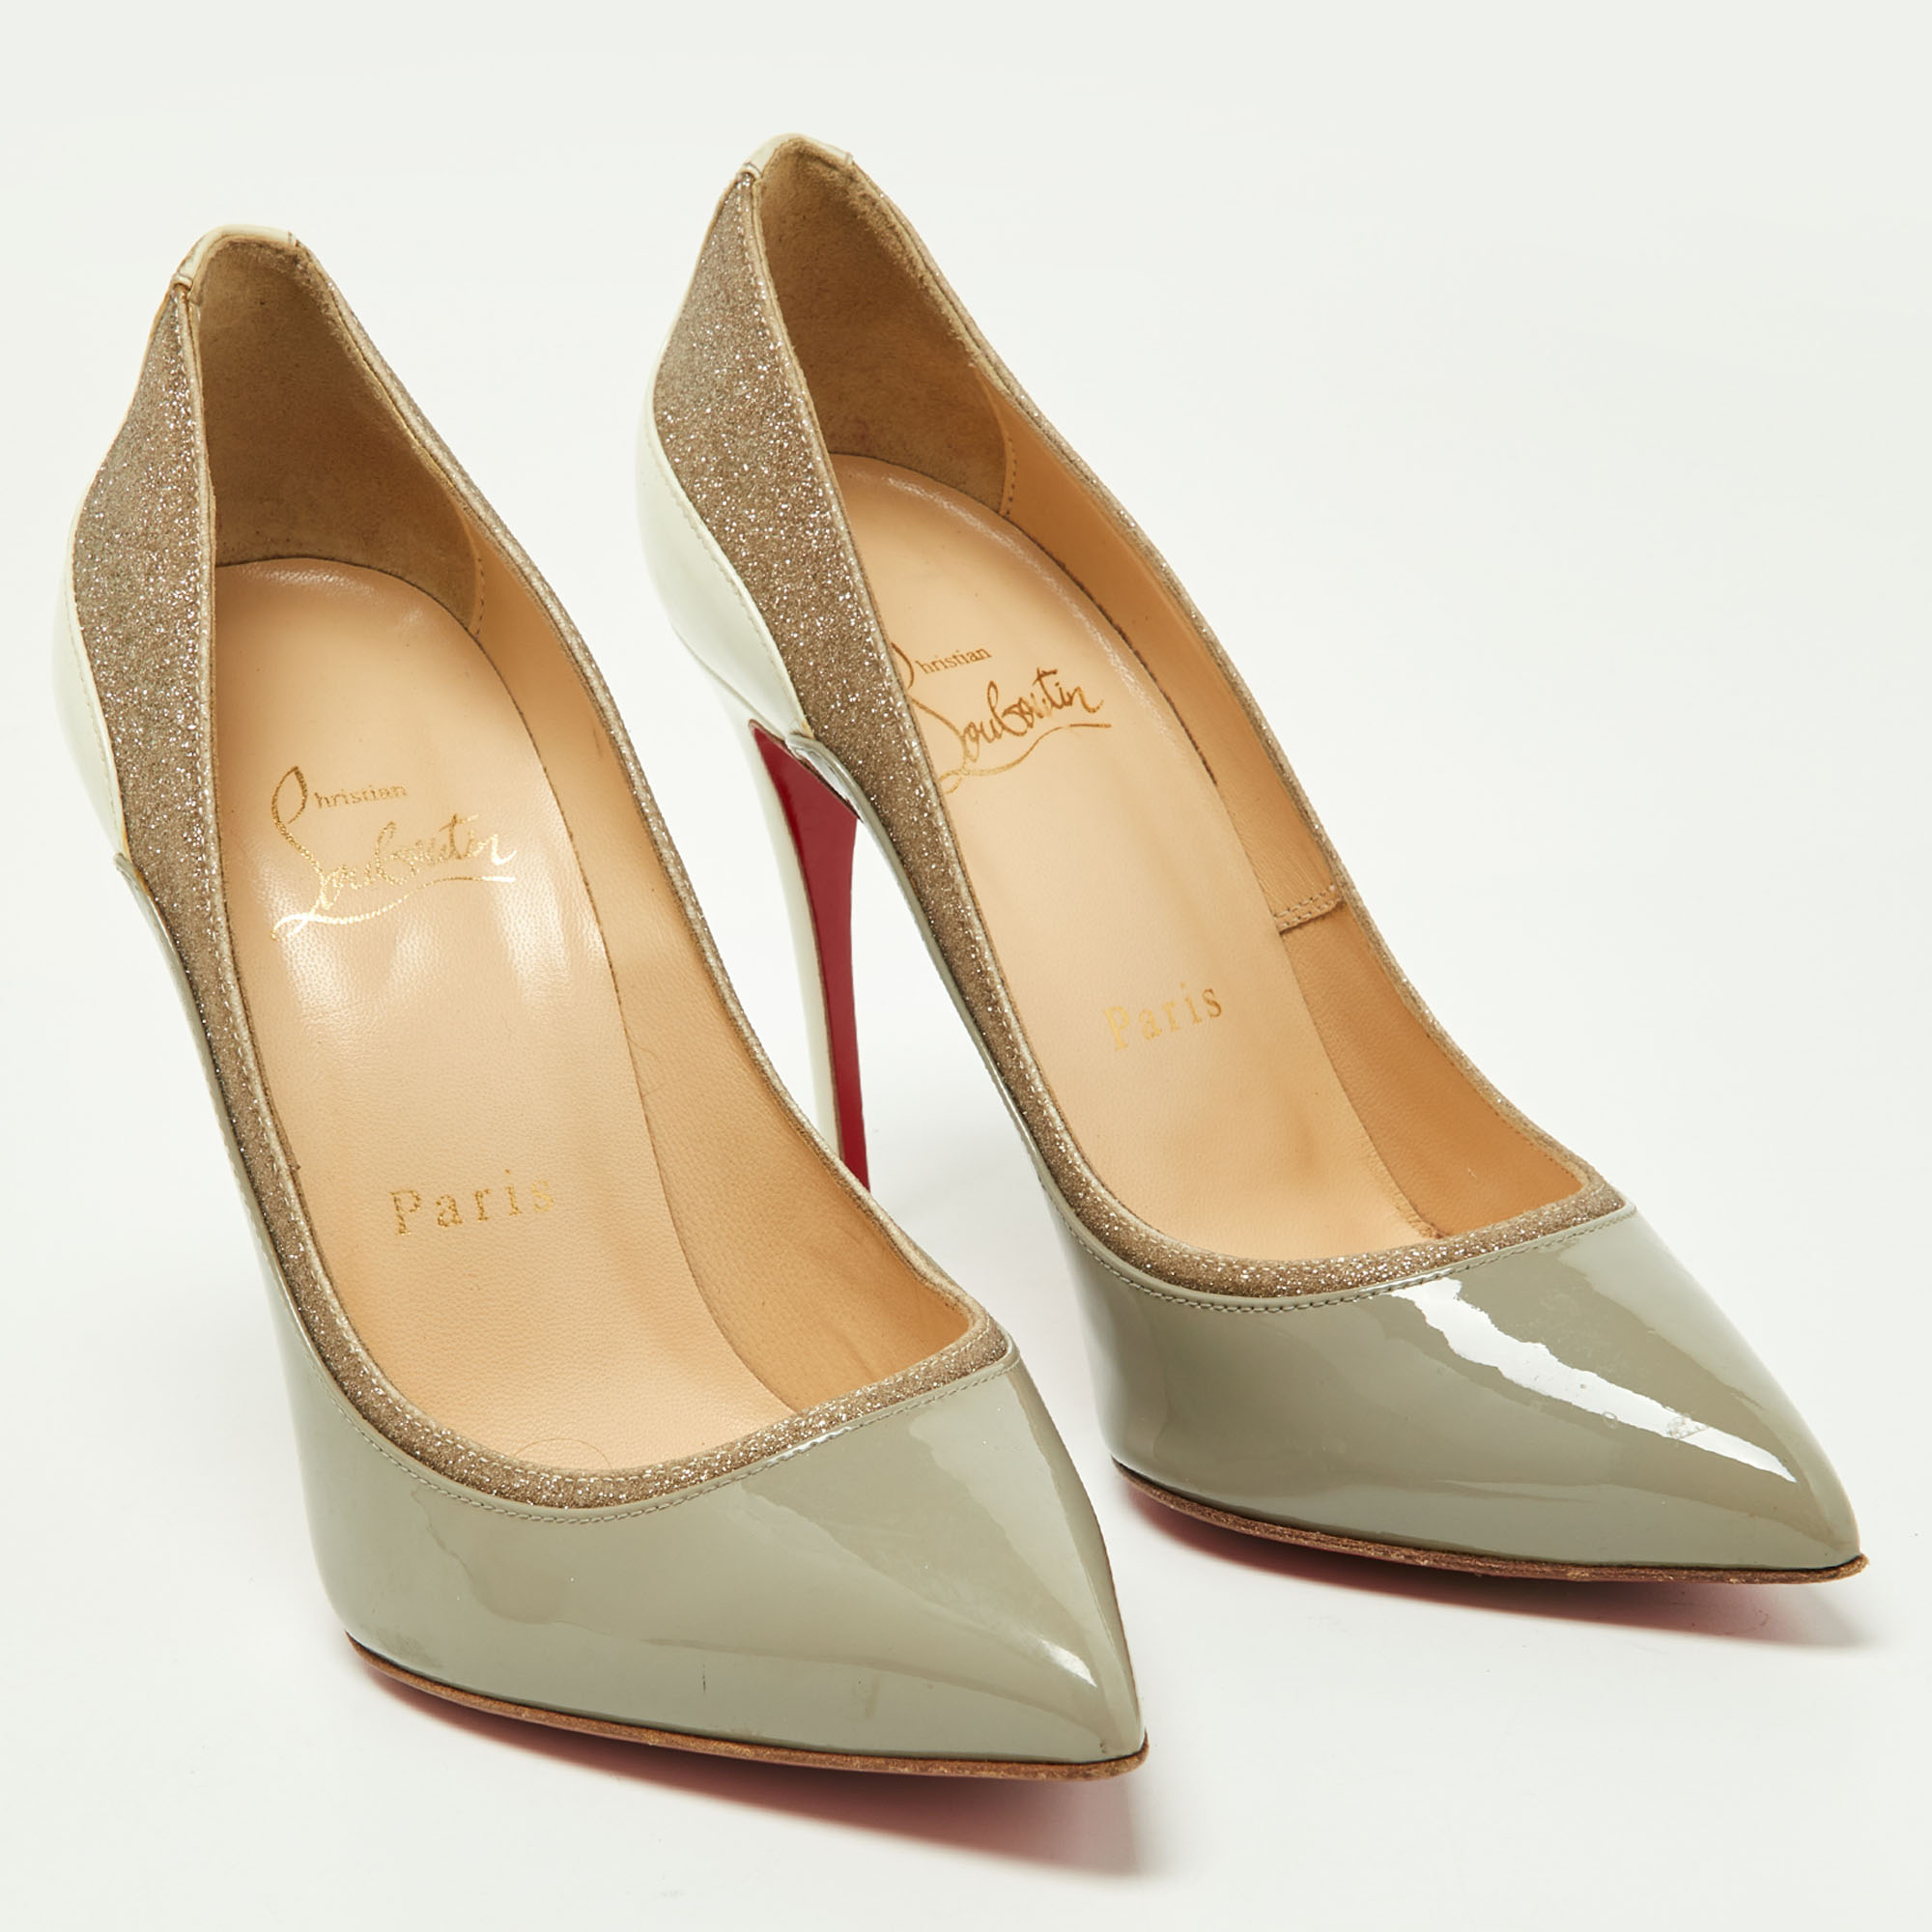 Christian Louboutin Tri-Color Patent Leather And Glitter Tucsick Pumps Size 35.5